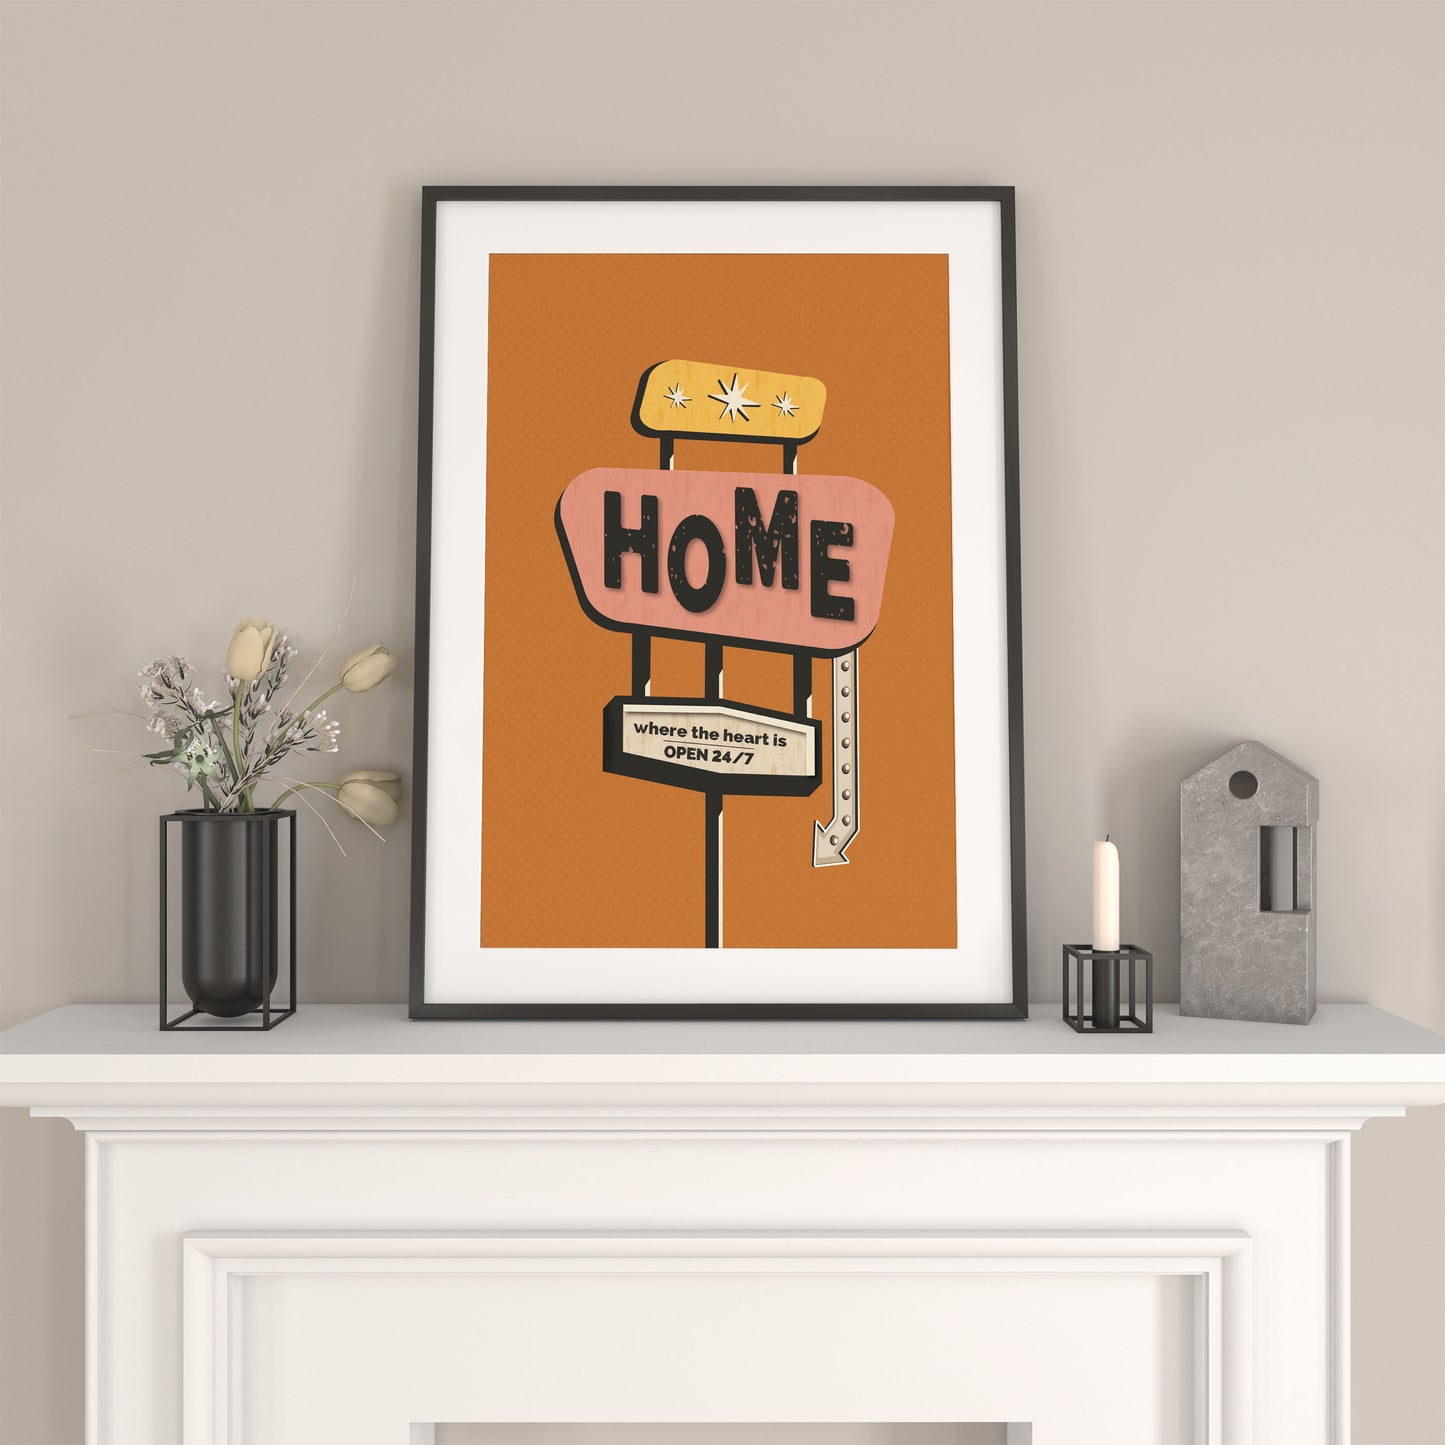 Wall art print in orange with a retro style home sign